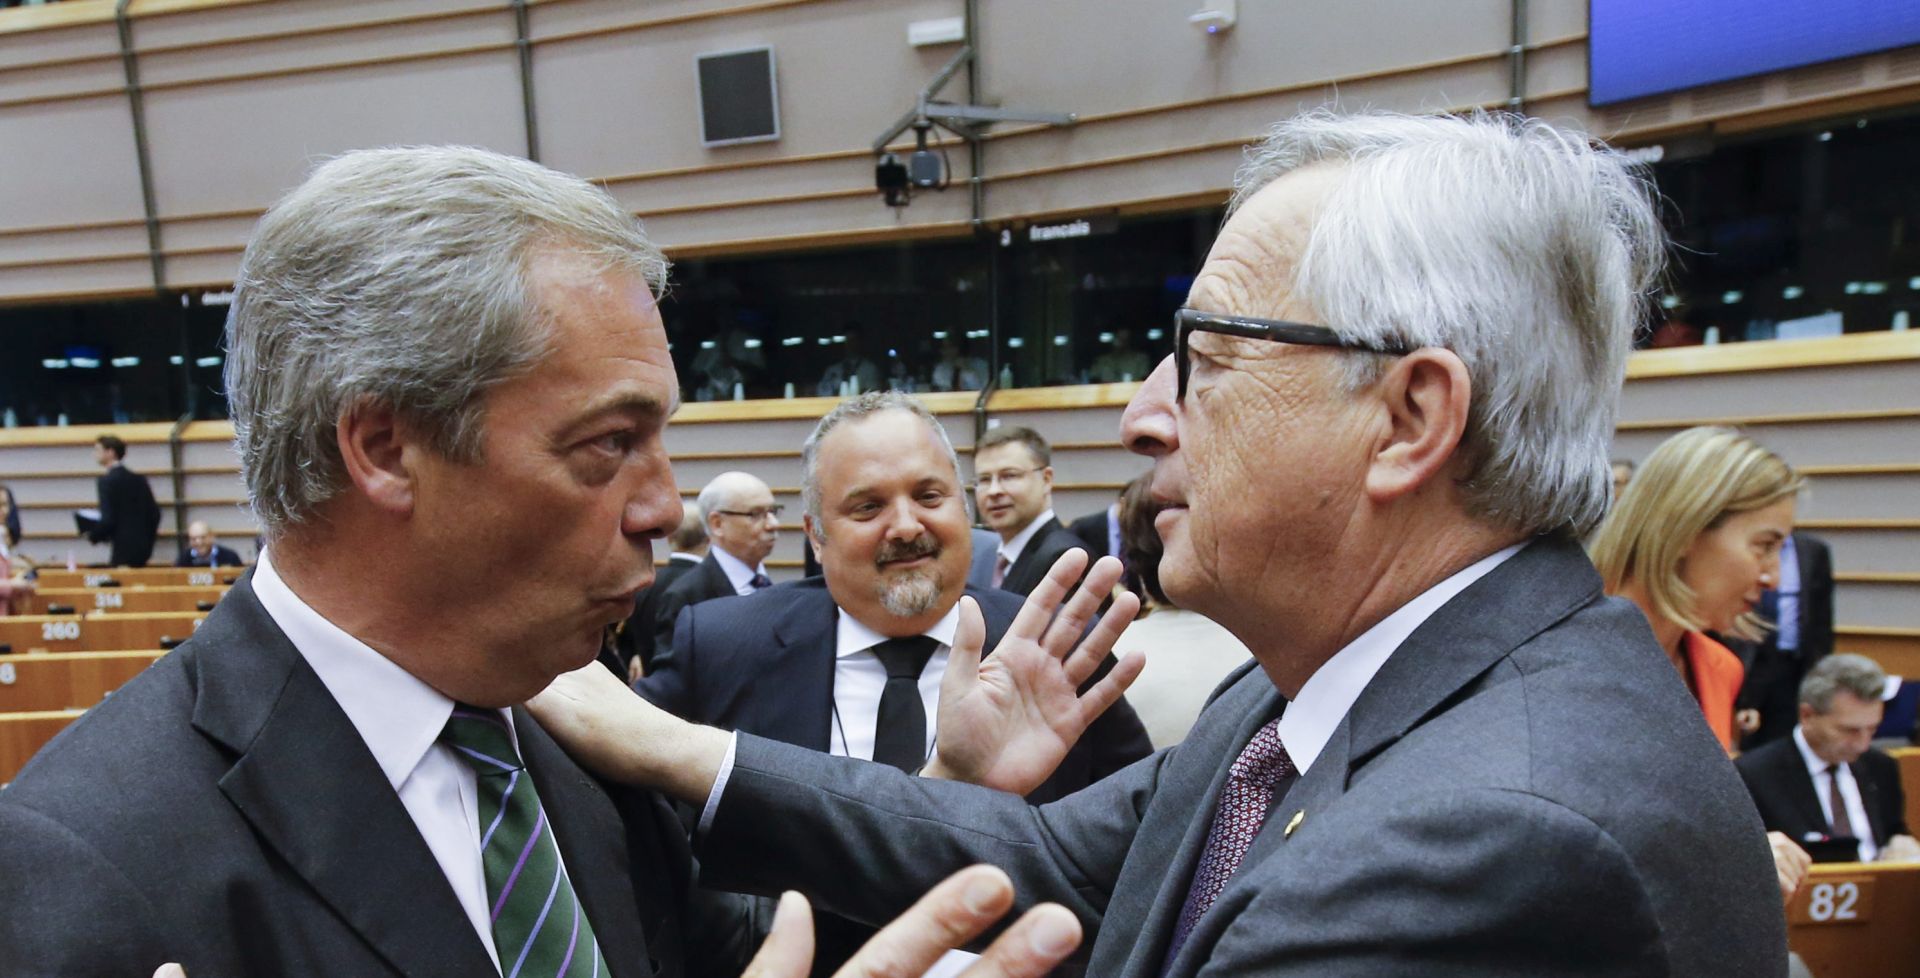 epa05395717 Nigel Farage (L), leader of the United Kingdom Independence Party (UKIP), chats with European Commission President Jean- Claude Juncker (R) at the start of a plenary session of the European Parliament, in Brussels, Belgium, 28 June 2016. The session will focus on the so-called 'Brexit' and is held ahead of a EU Summit. Later this afternoon EU leaders will met for the first time since the British referendum, in which 51.9 percent voted to leave the European Union (EU).  EPA/OLIVIER HOSLET